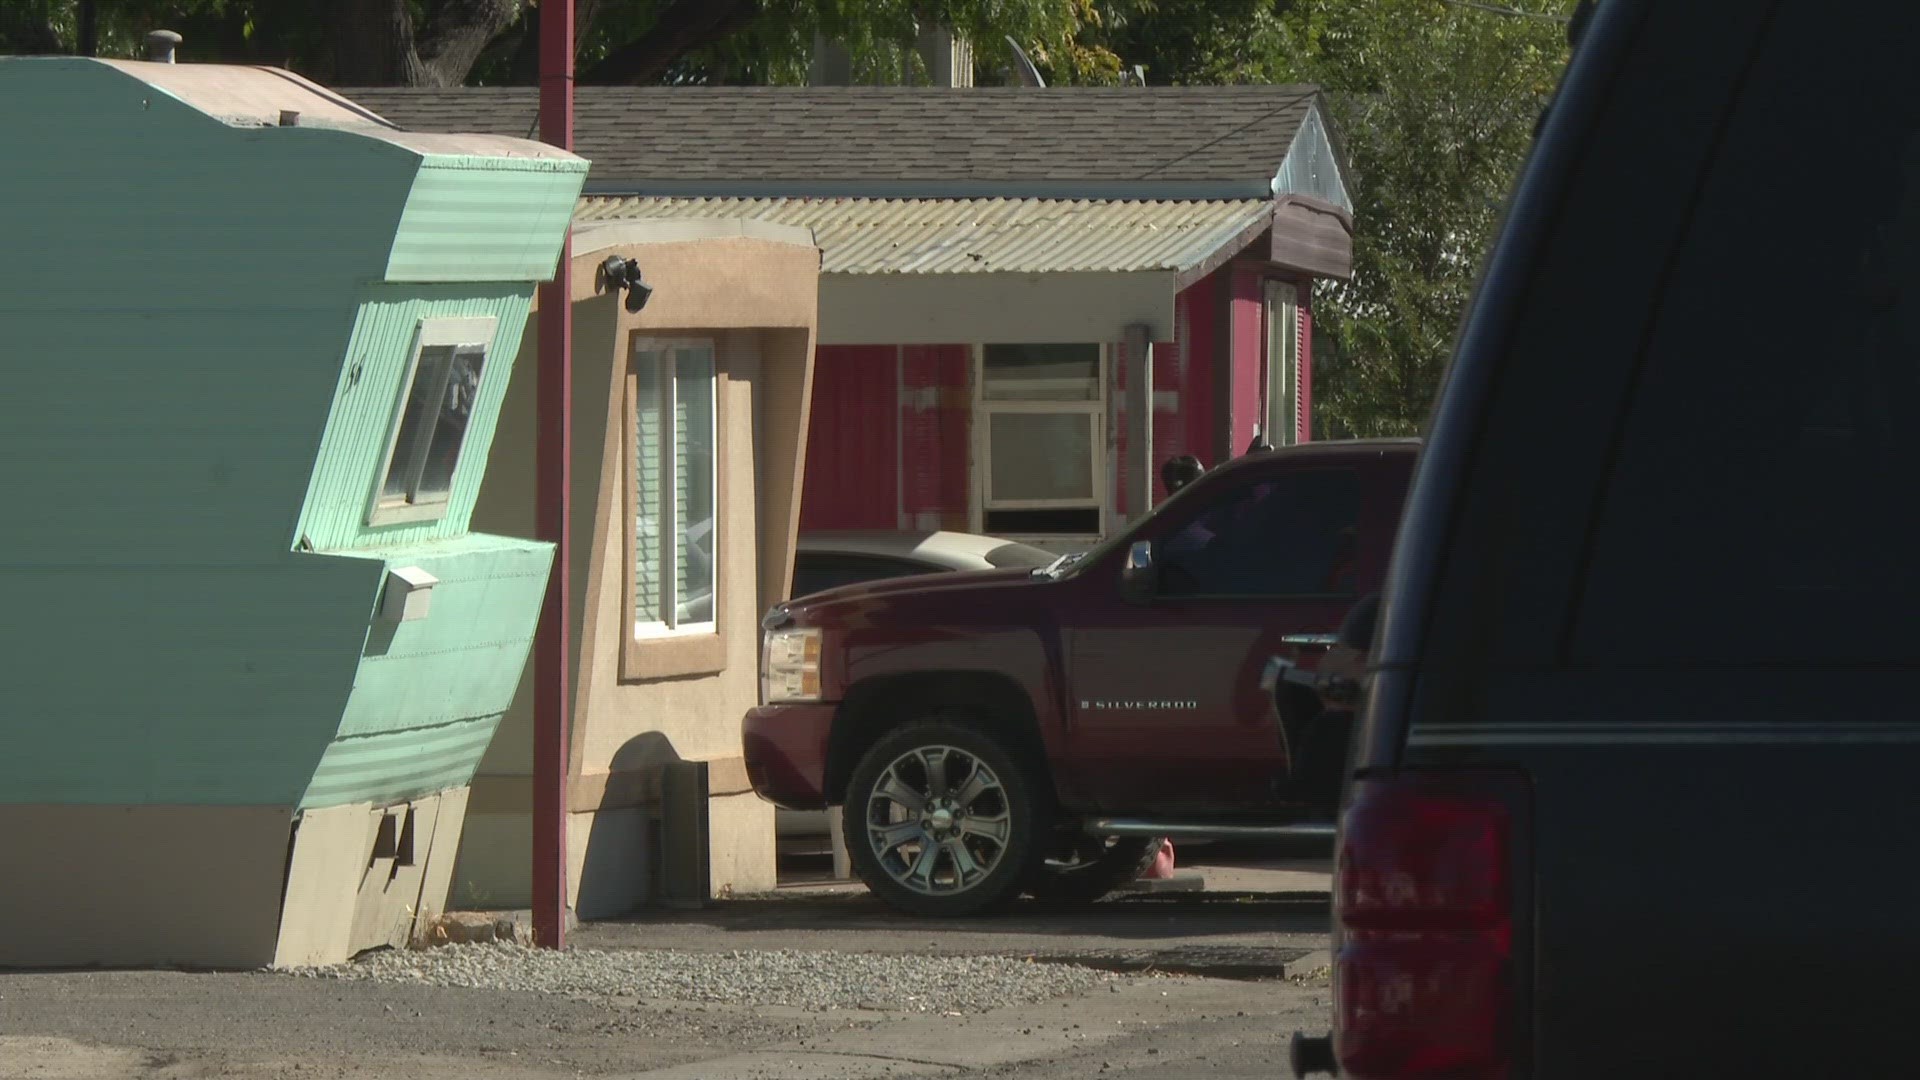 With help from a nonprofit, residents are raising $11.5 million to purchase the mobile home park to prevent them from being displaced.